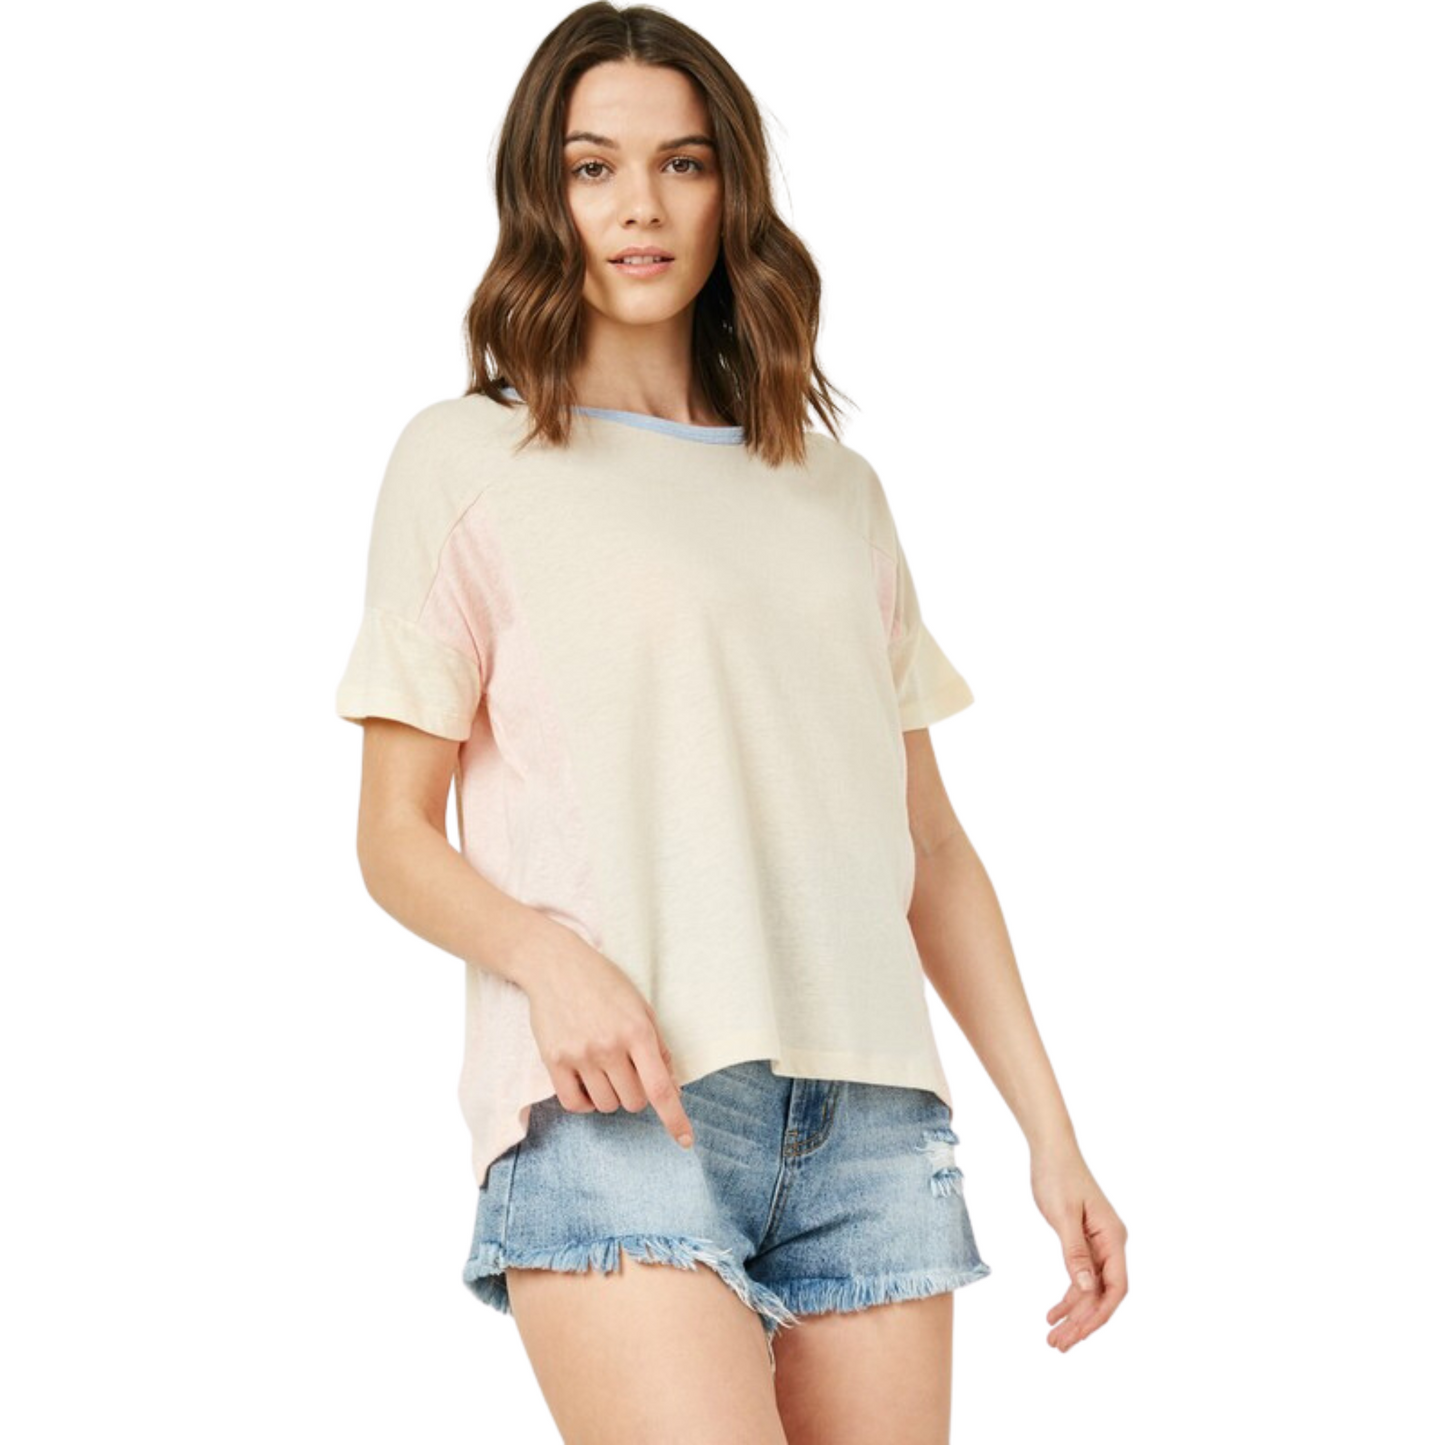 This Color Block Knit Tee has a classic look, featuring an off-white color and short sleeve design. Perfect for everyday wear, this basic tee is made with quality fabric that's soft and breathable, providing both comfort and style.